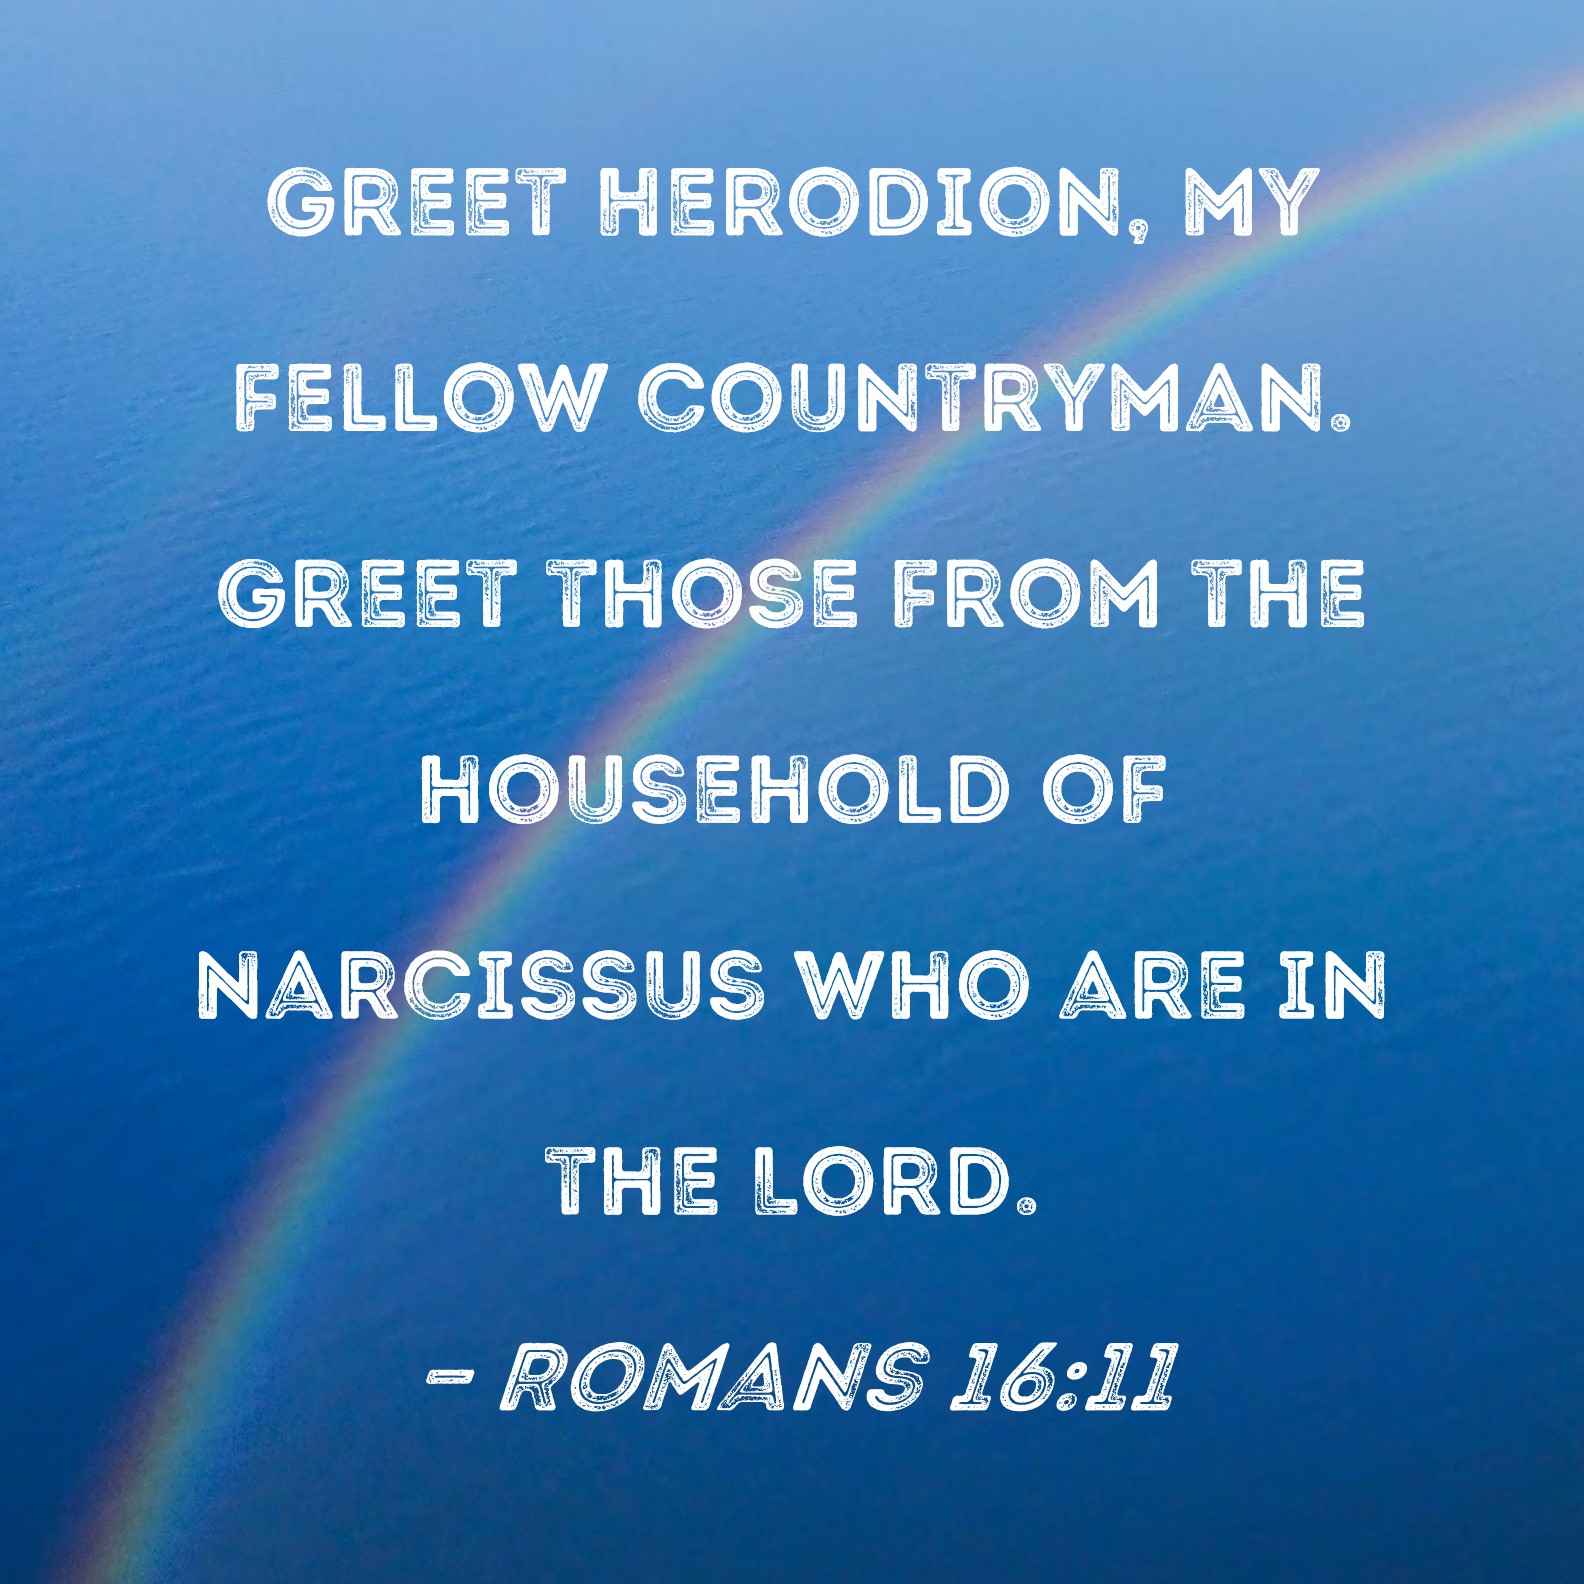 Romans 1611 Greet Herodion, my fellow countryman. Greet those from the